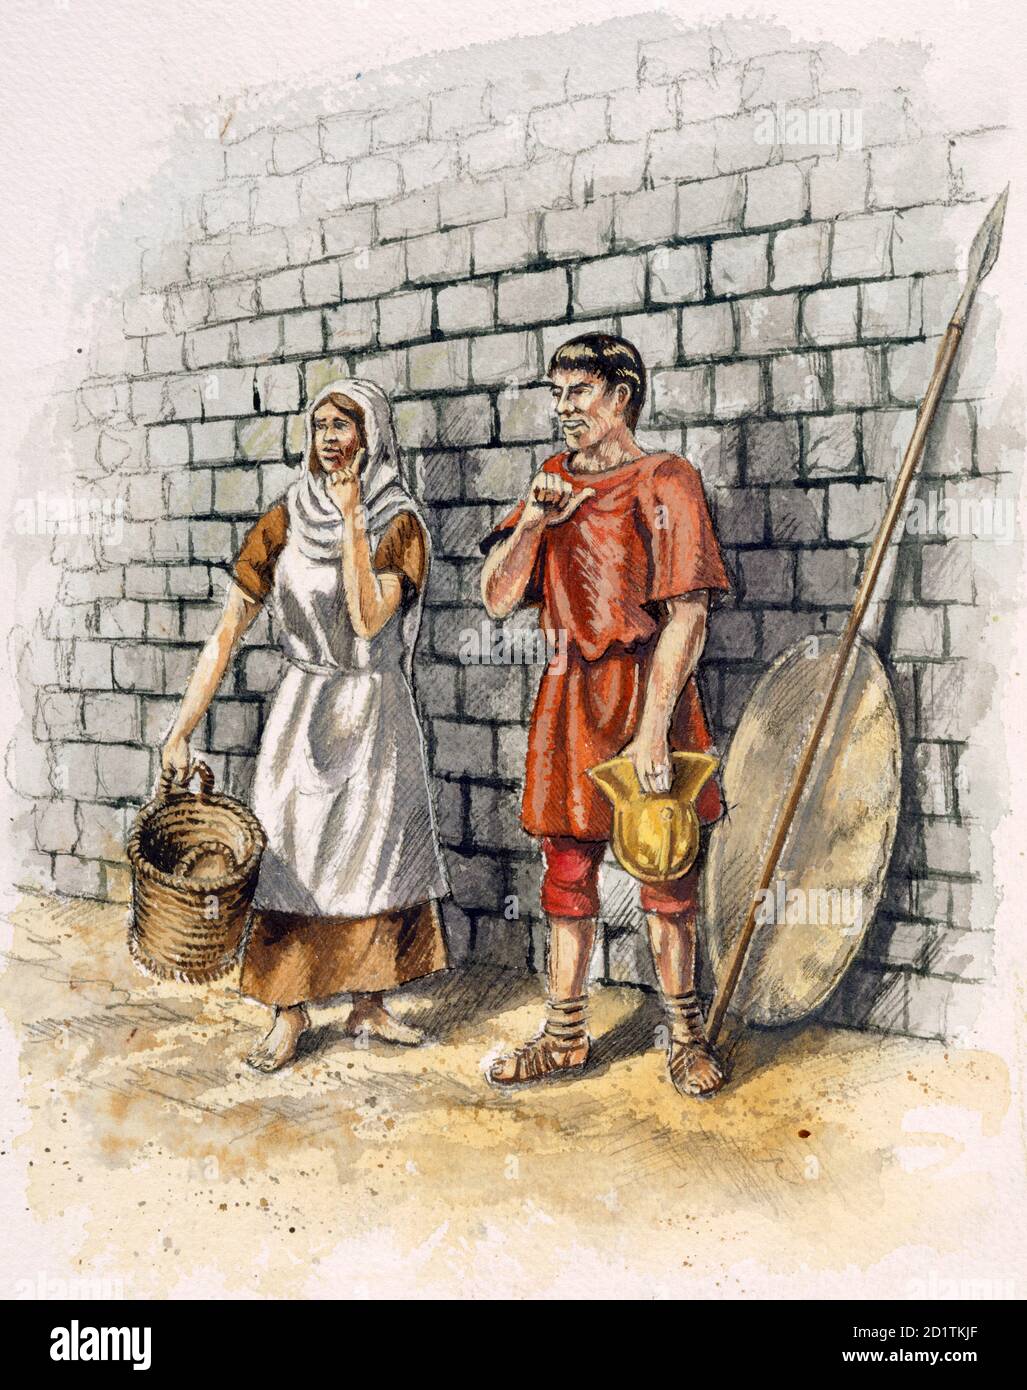 OLD SARUM, Wiltshire. Reconstruction drawing by Peter Dunn (English Heritage Graphics Team) of a Roman man and woman. Stock Photo